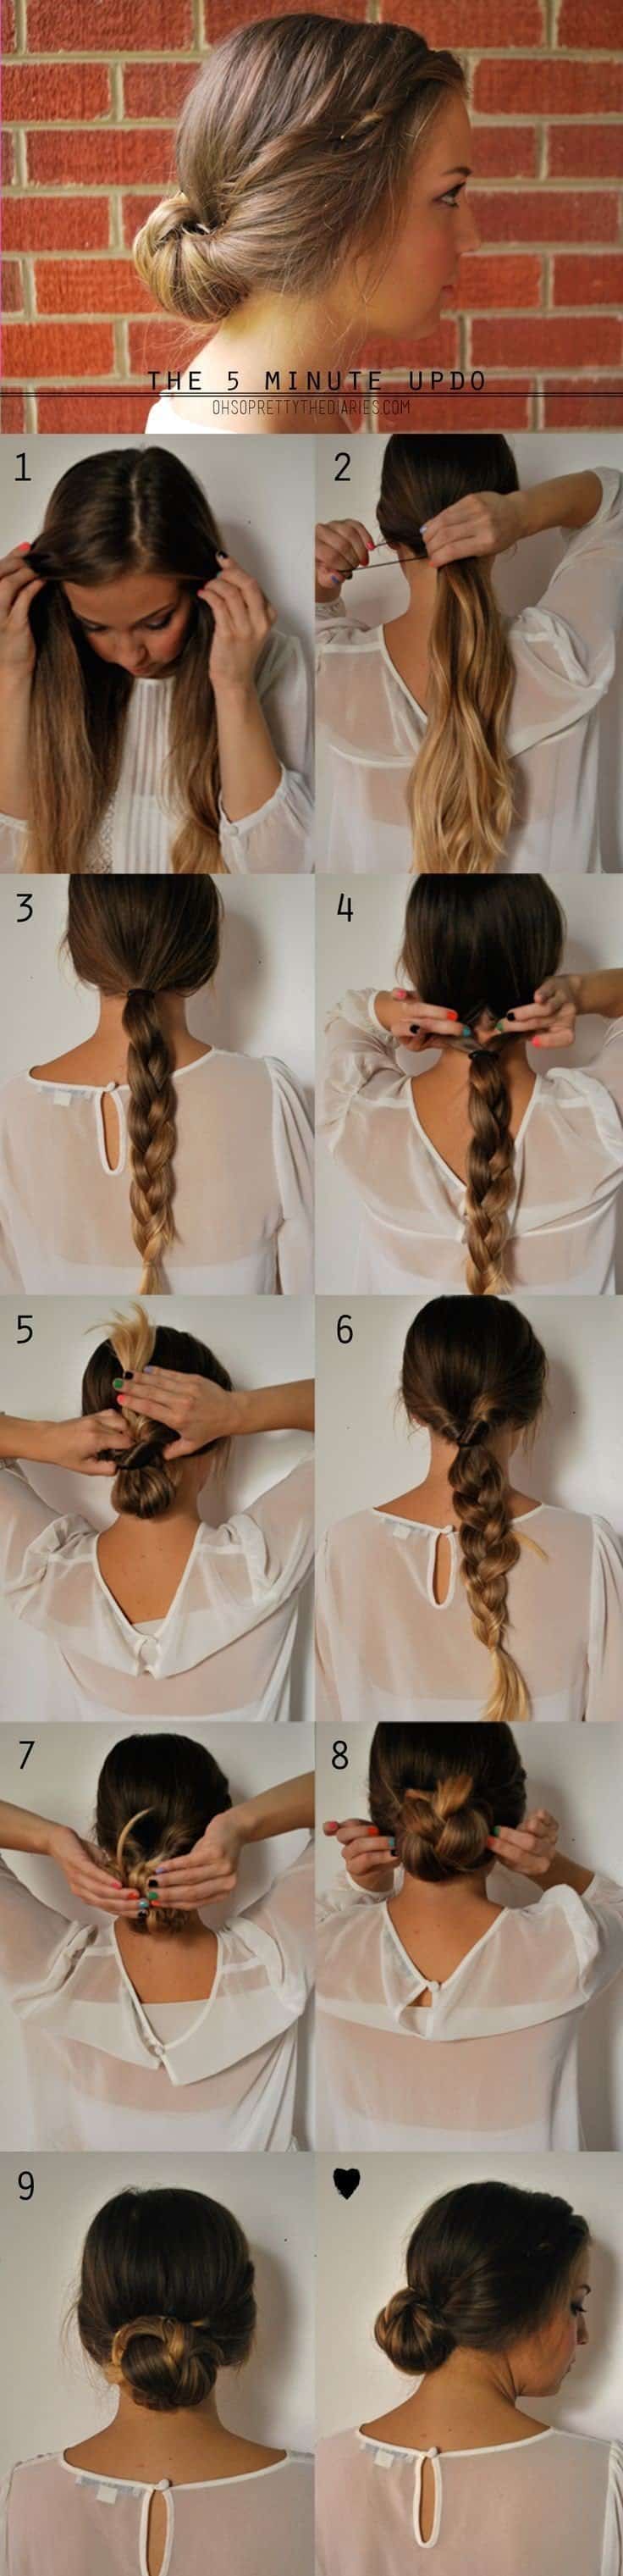 5 minute updo